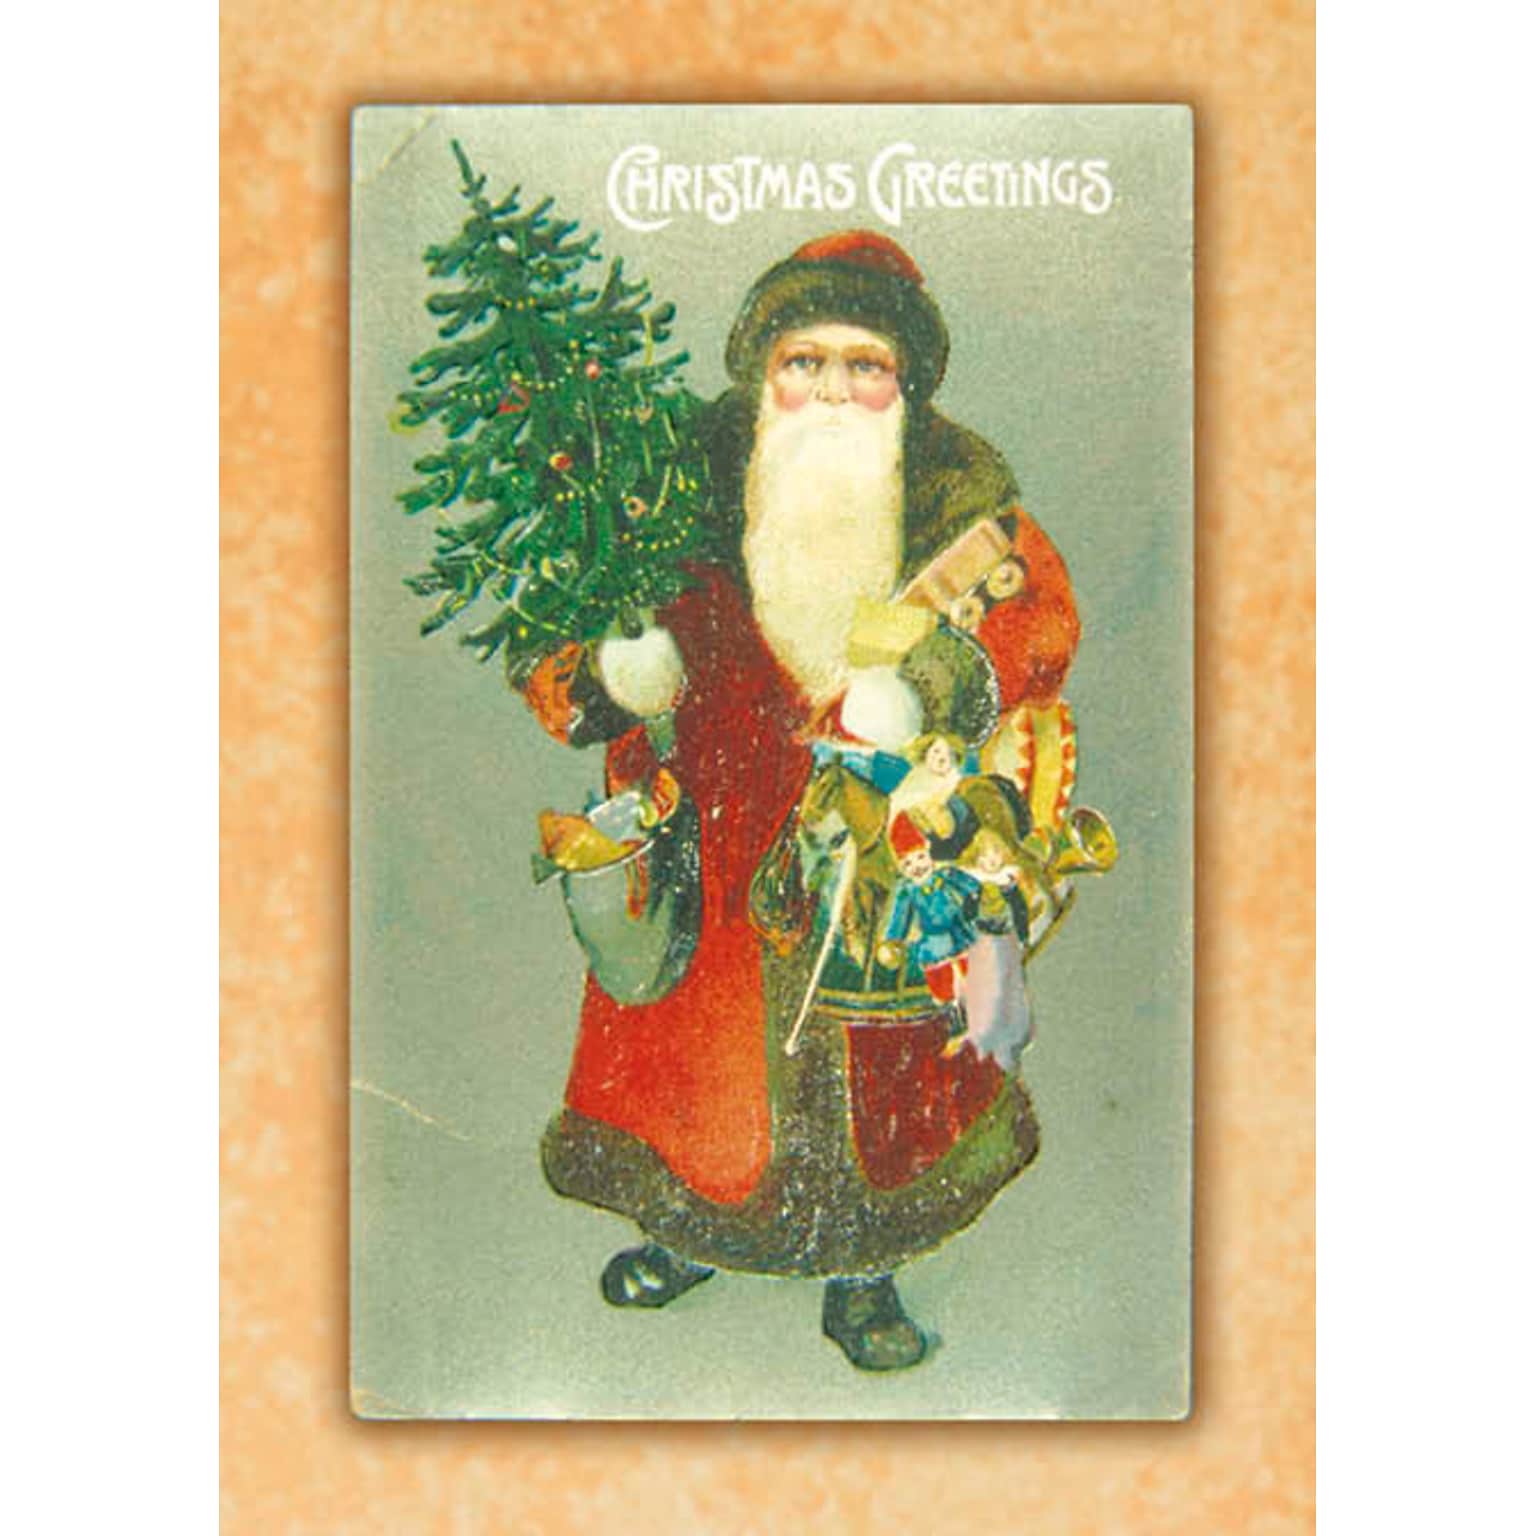 Vintage Greetings Christmas with Santa Holiday Cards, With A7 Envelopes, 7 x 5, 25 Cards per Set